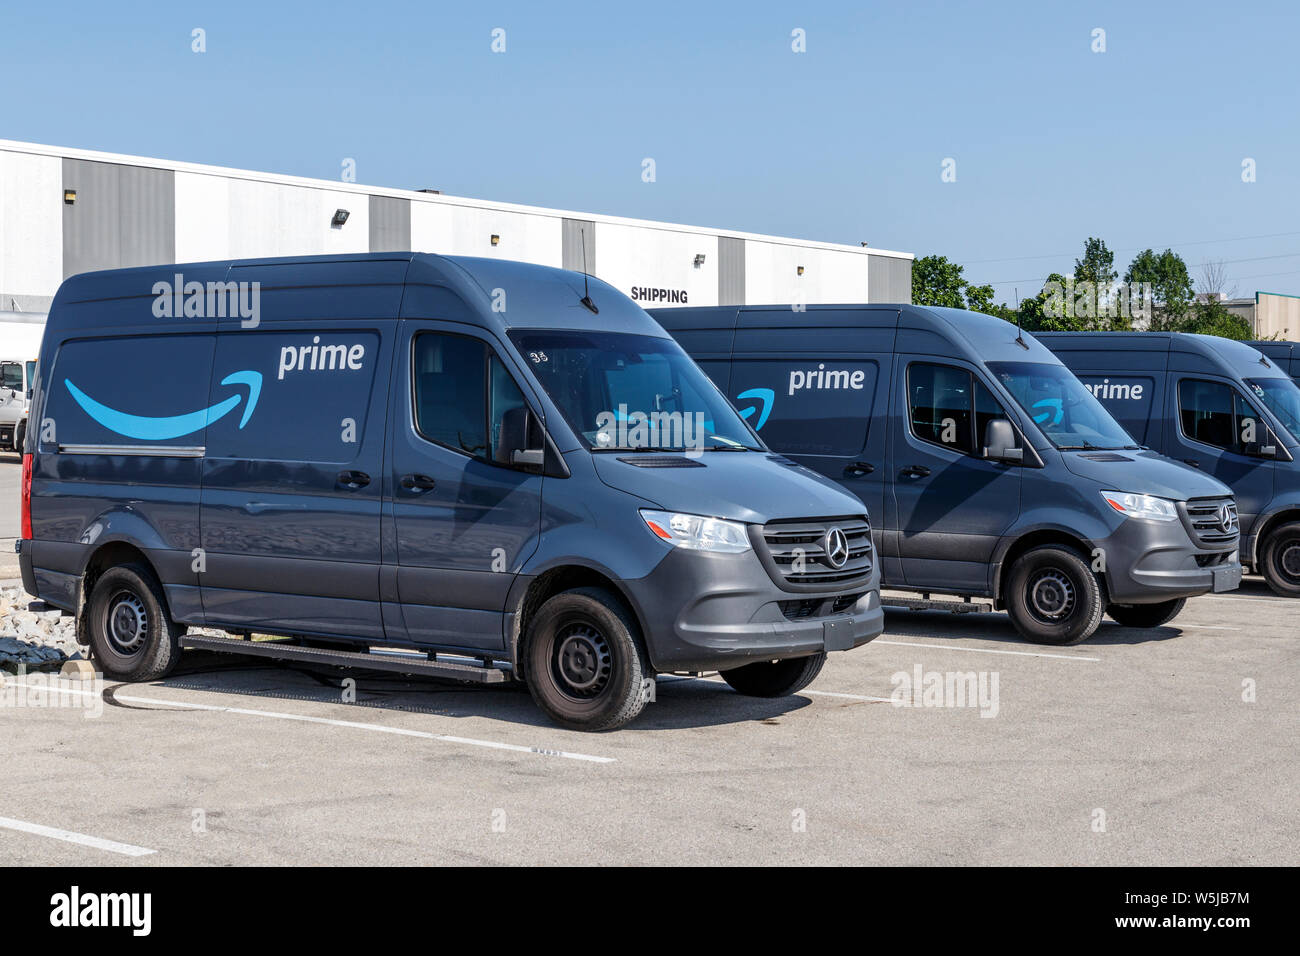 Indianapolis - Circa July 2019: Amazon Prime delivery van. Amazon.com is  getting In the delivery business With Prime branded vans Stock Photo - Alamy